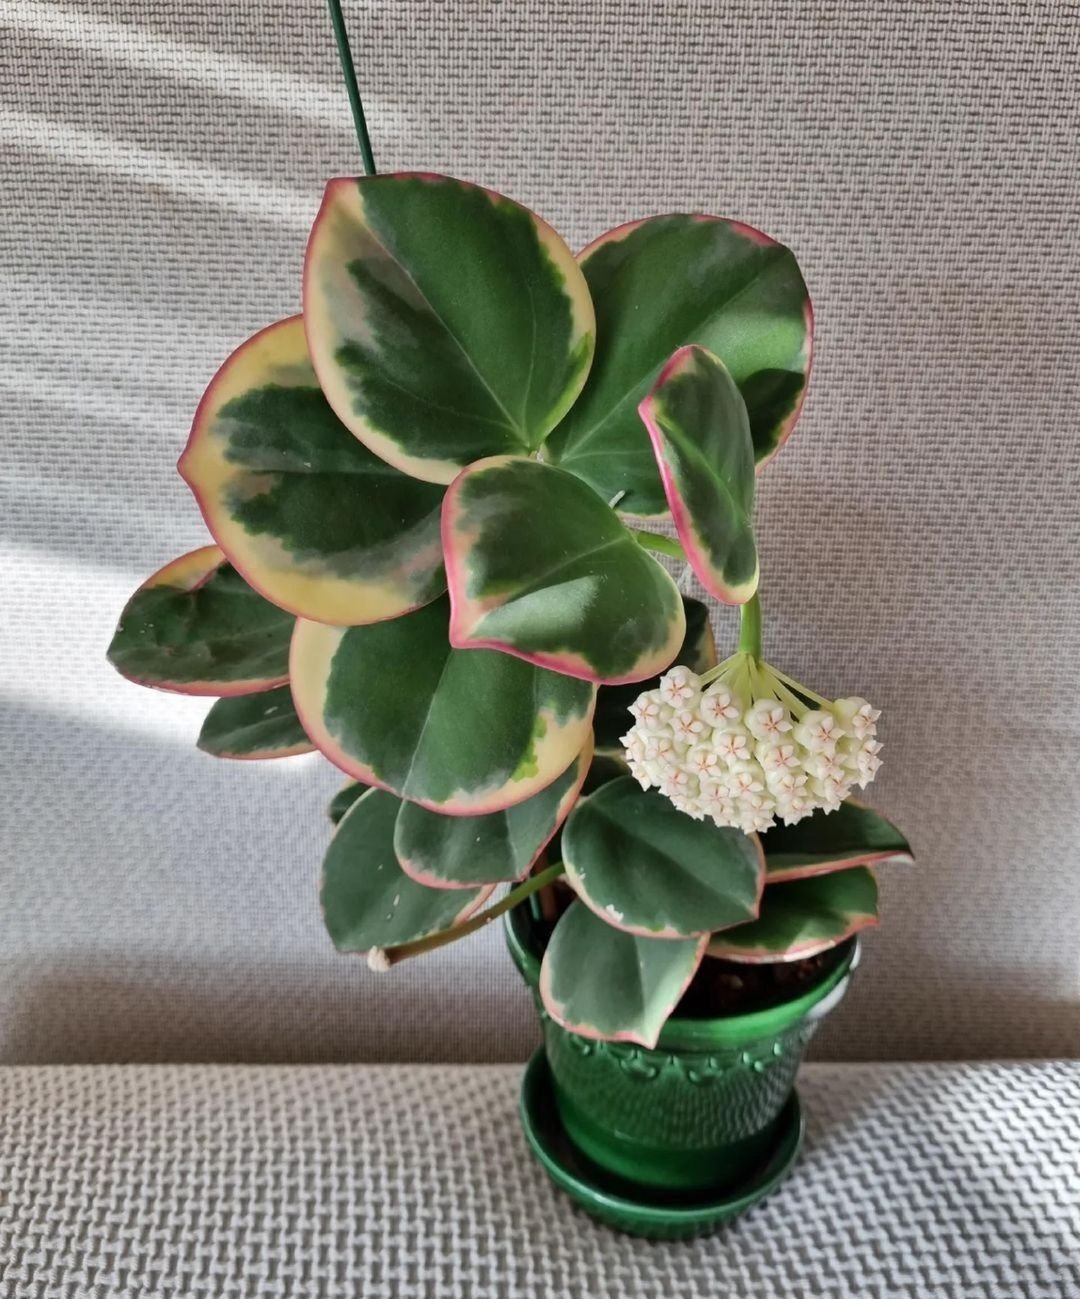  Green Hoya plant with white and pink flowers in a pot.